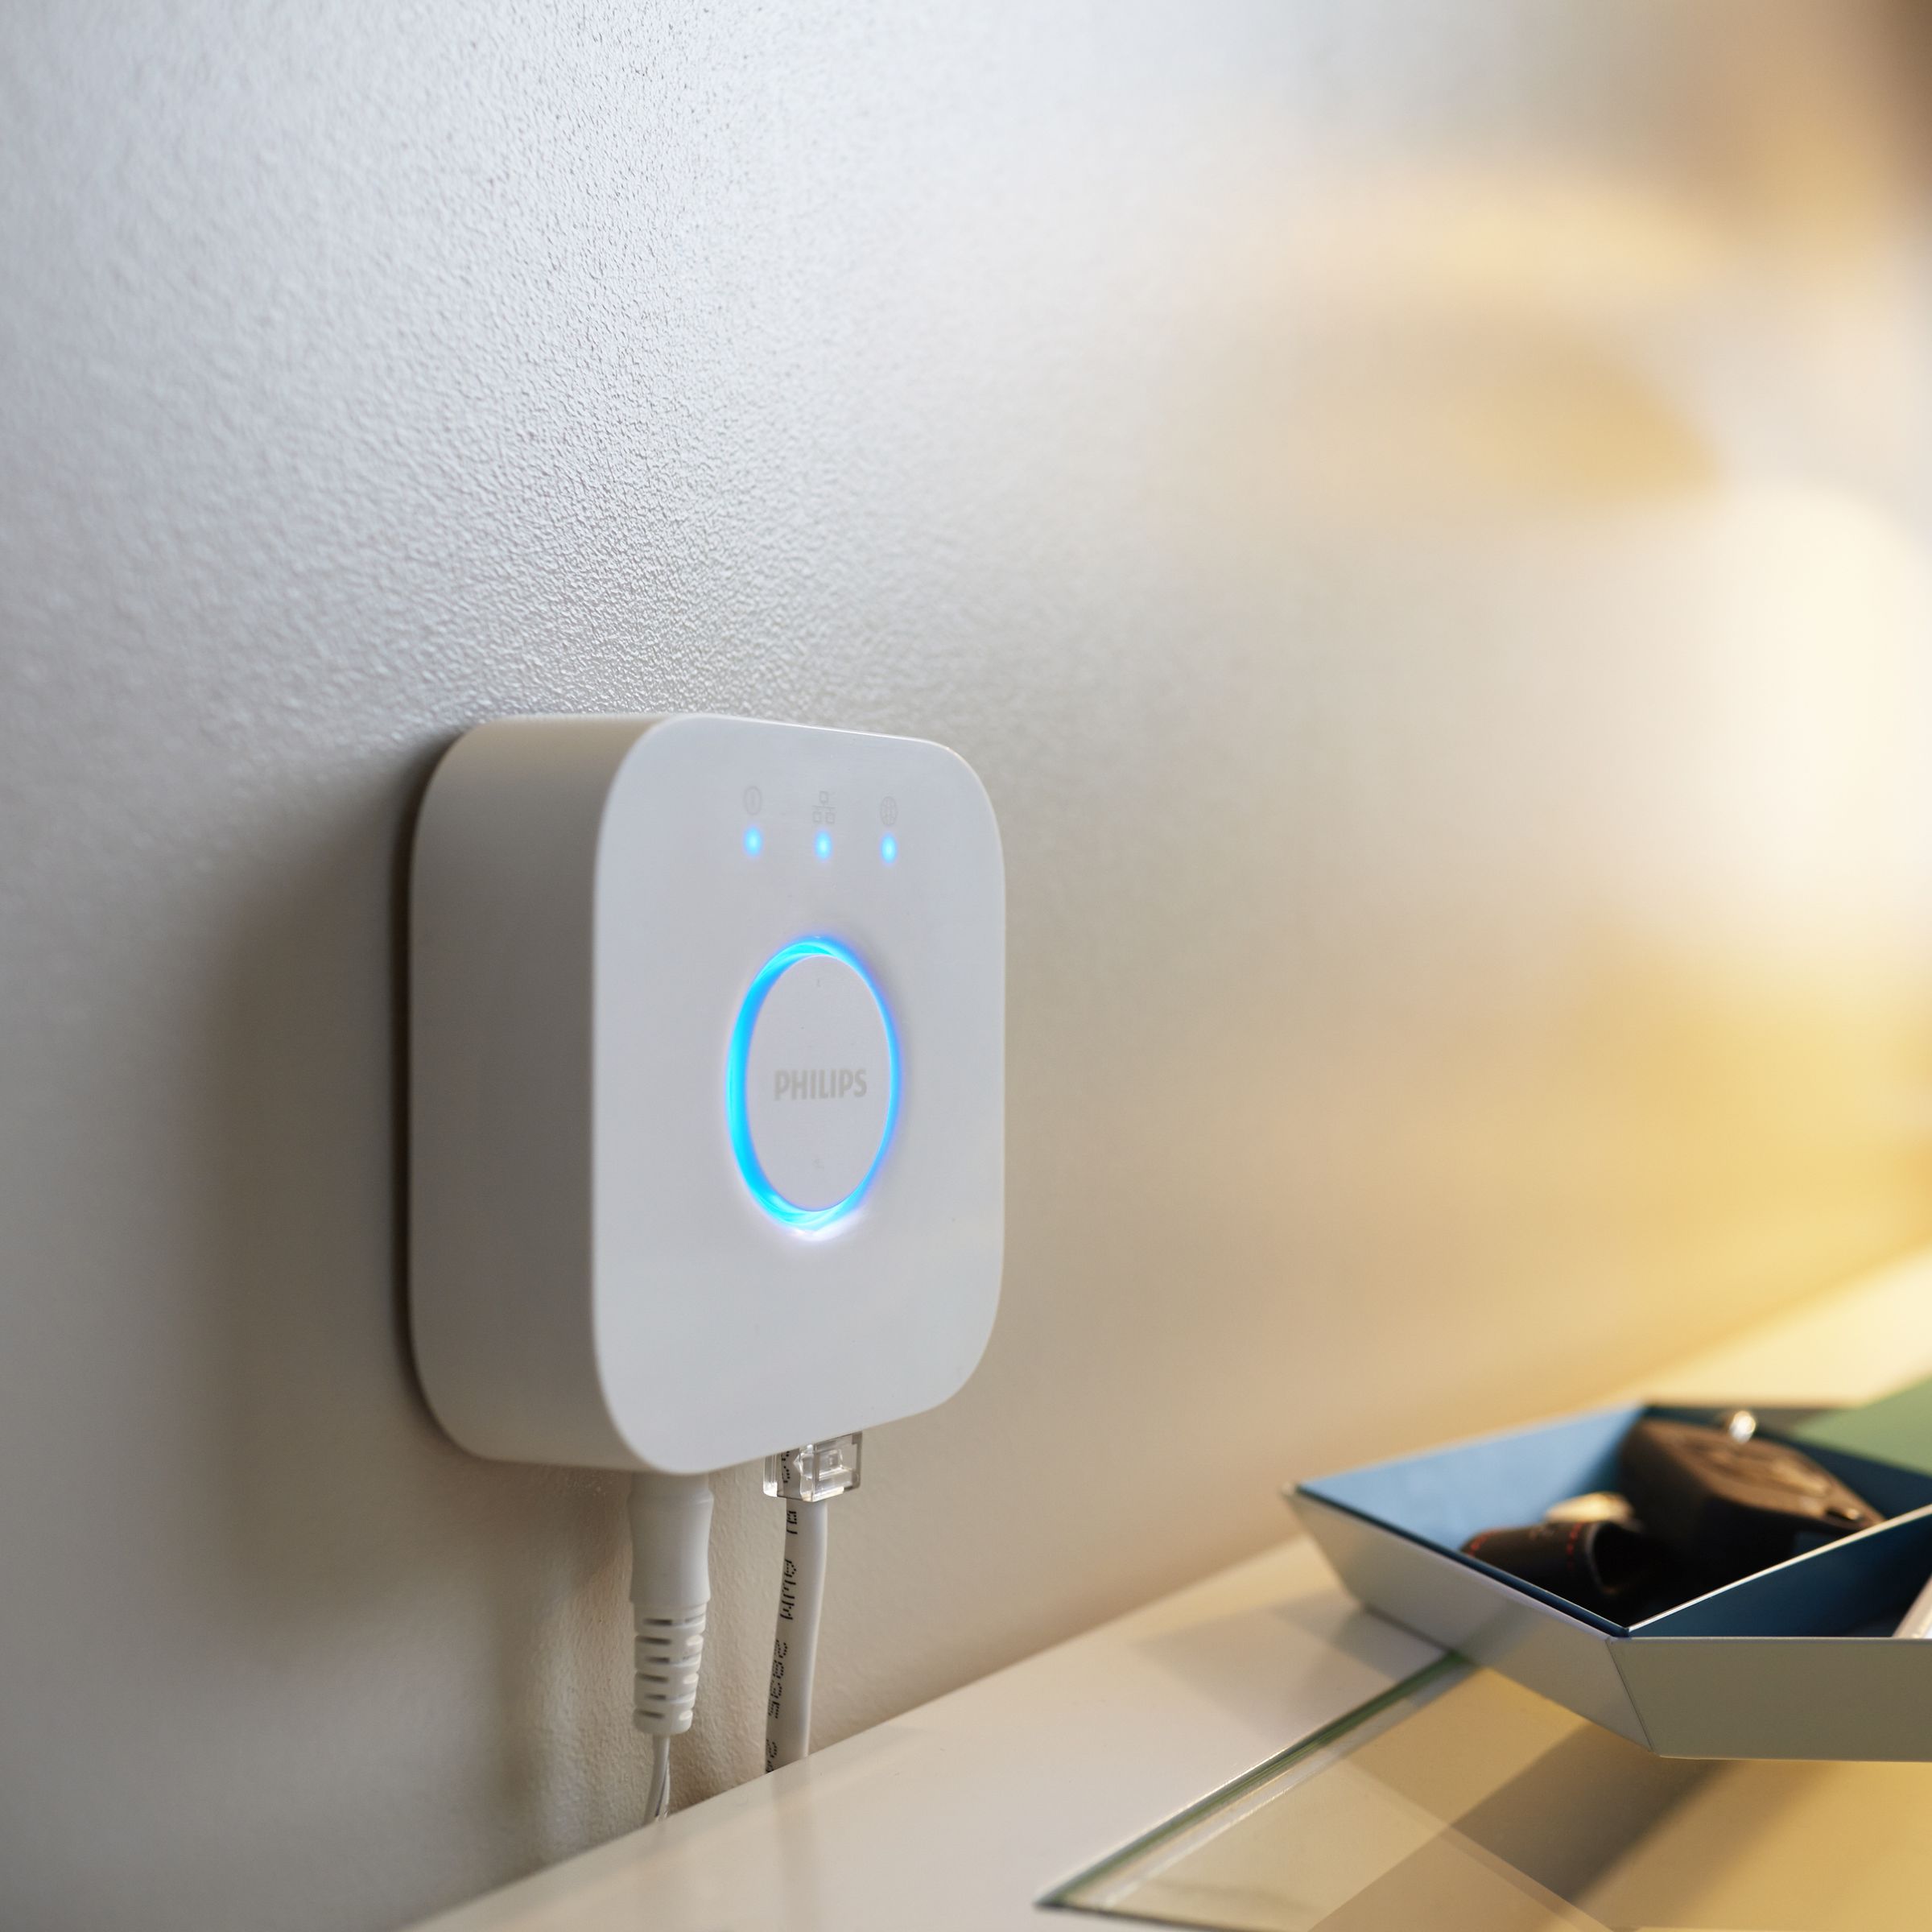 Philips Hue Bridge device shown wall-mounted above a table near a lamp.